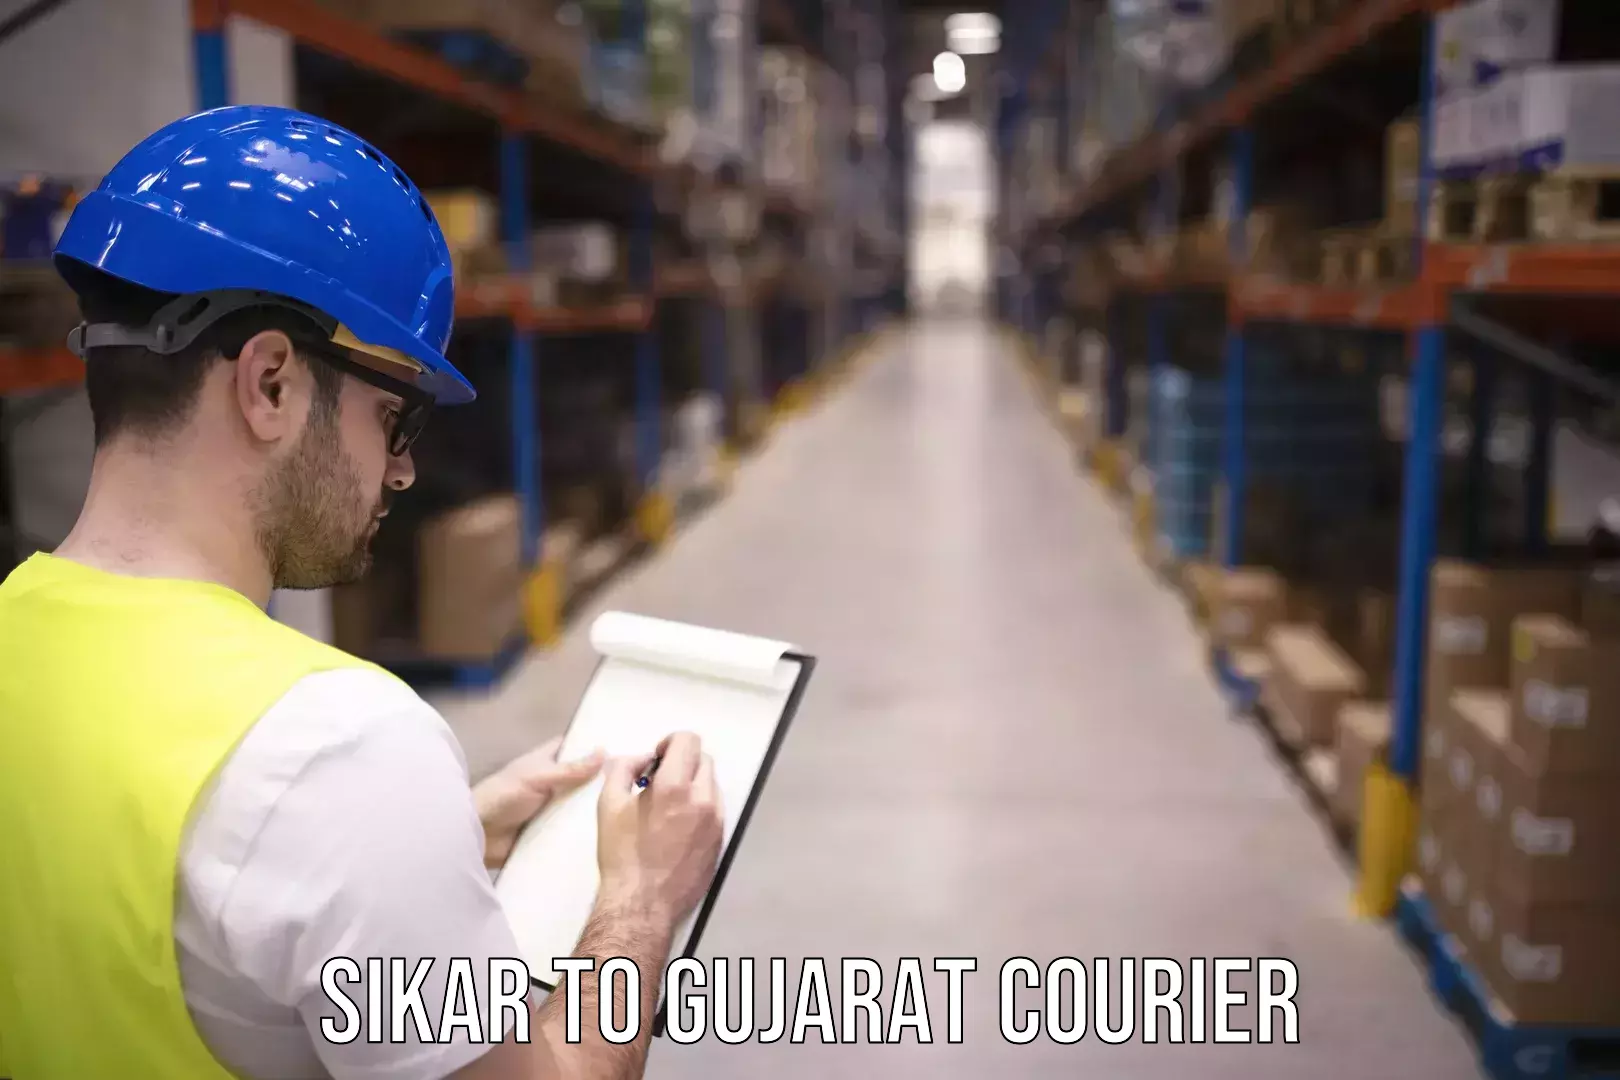 Customer-oriented courier services Sikar to Gujarat